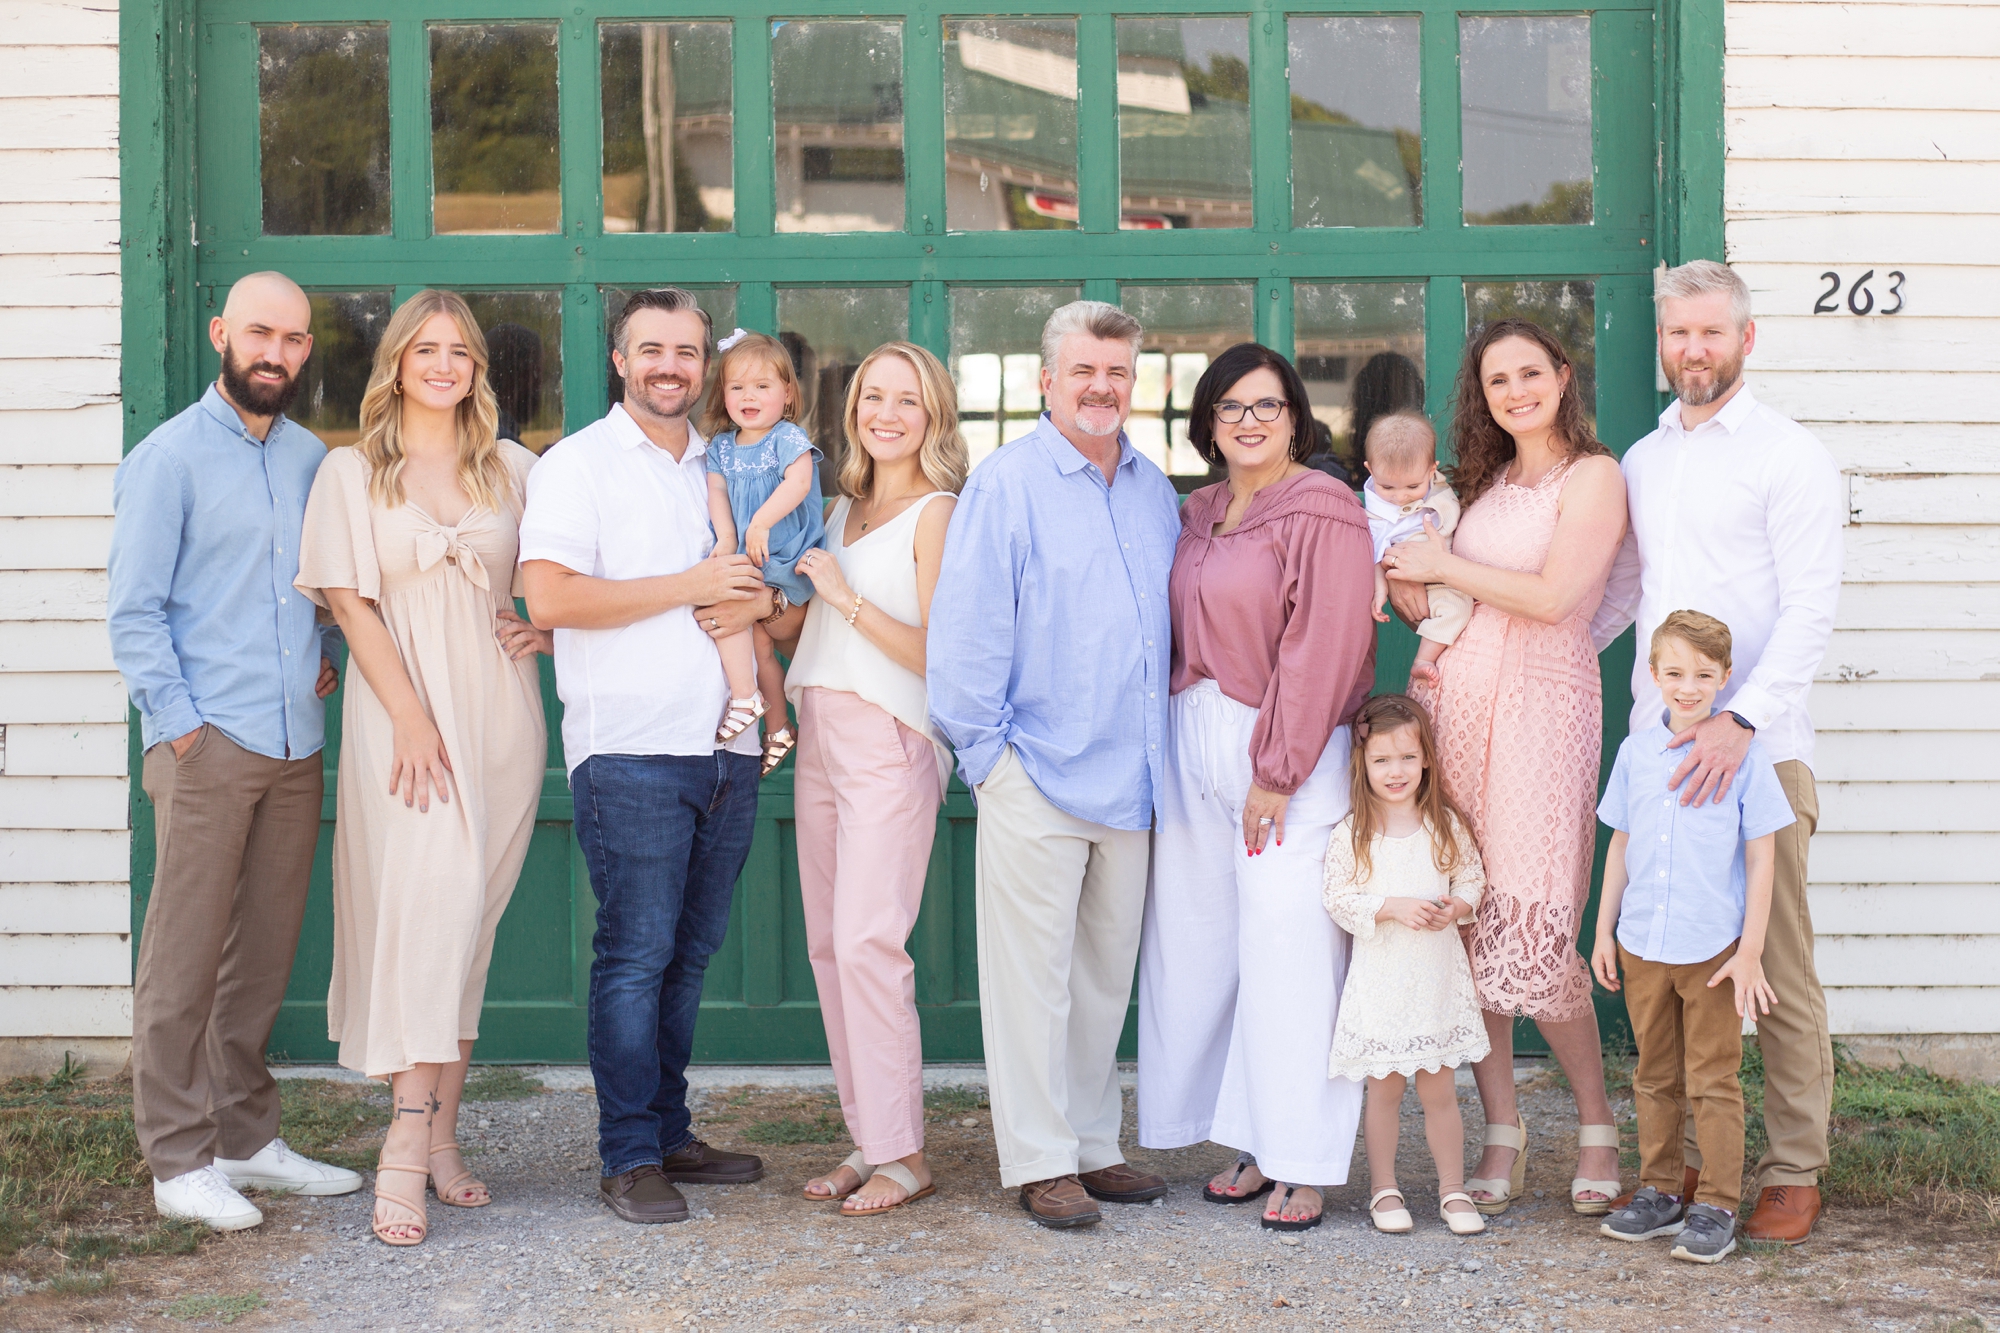 The Bishops' extended family session is live on the blog now! I loved hanging out with this sweet family for a little while and capturing them all together! This session is featured on my monthly membership, Behind the Lens! Go along with me on this session and see how I shoot it from the settings I chose to how I posed them! Click to learn more!